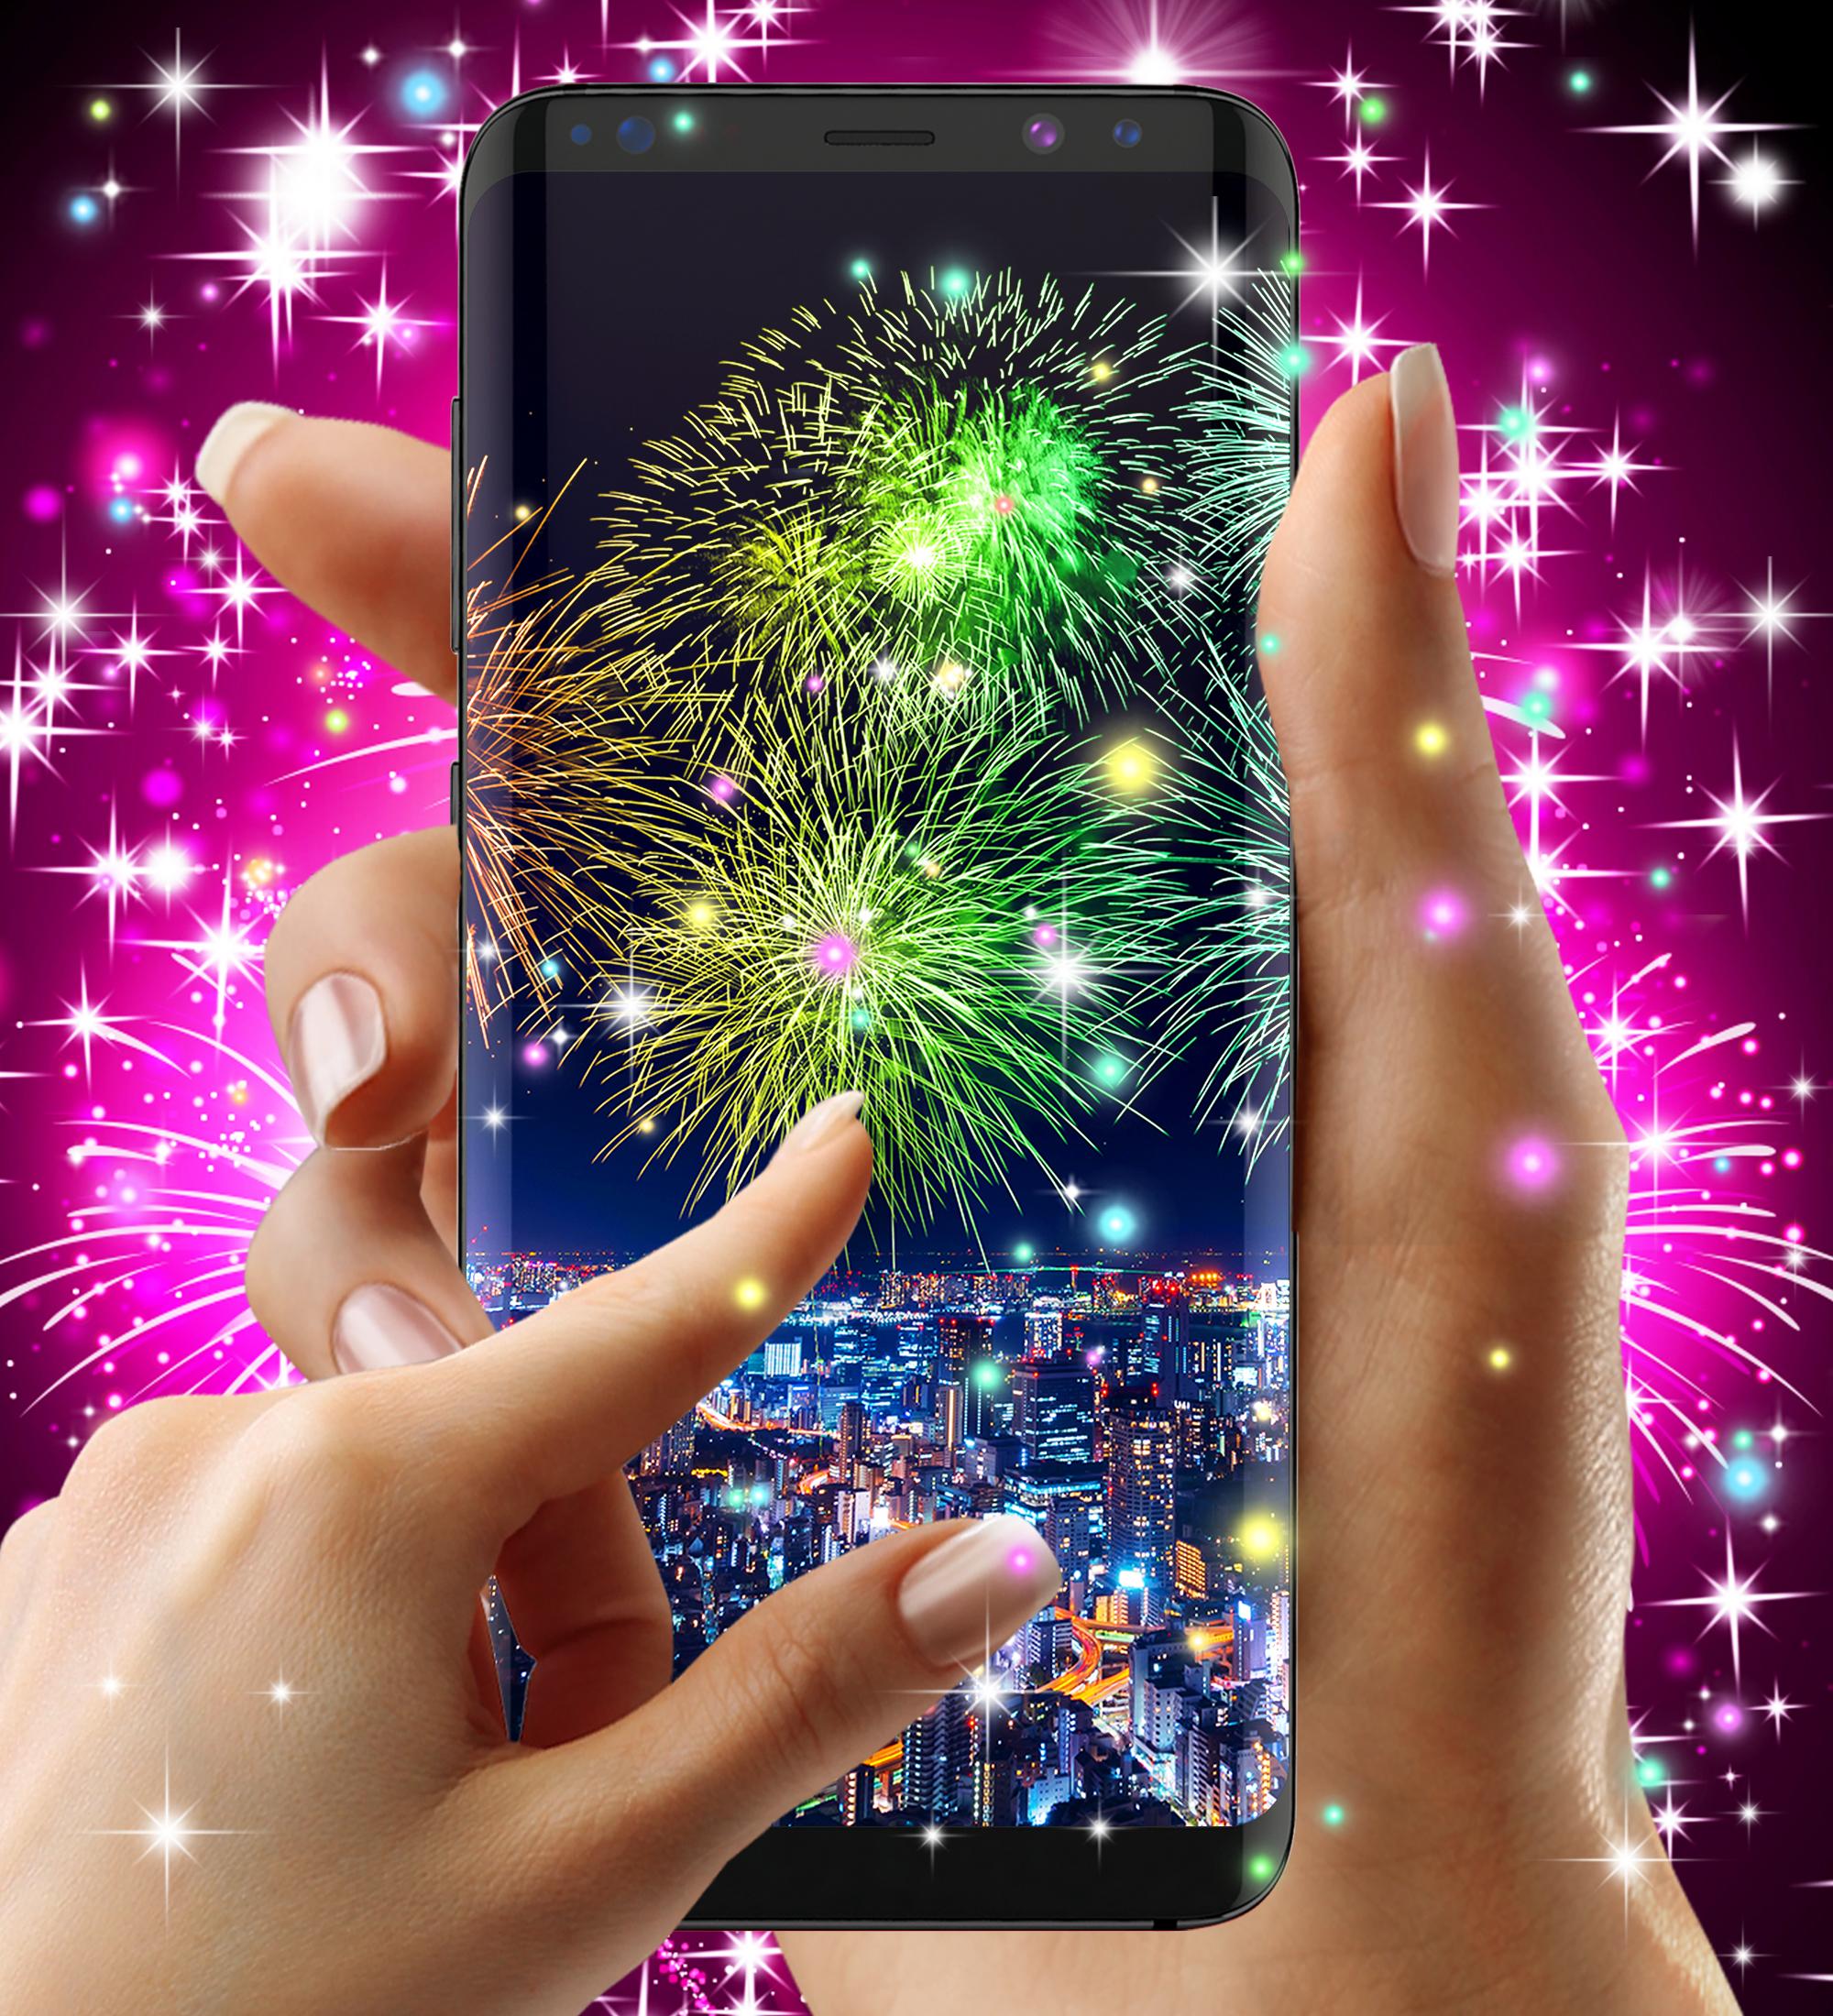 21 Live Wallpaper For Android Apk Download